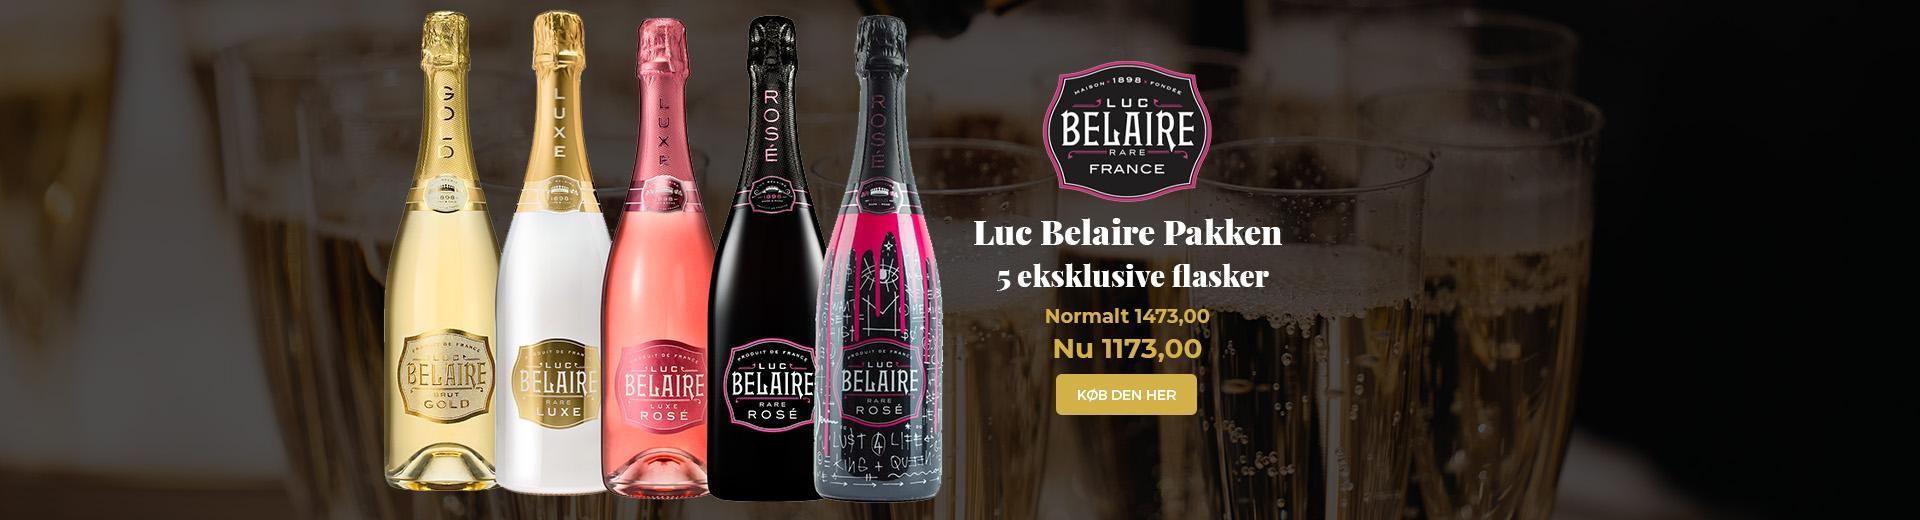 Luc-belaire